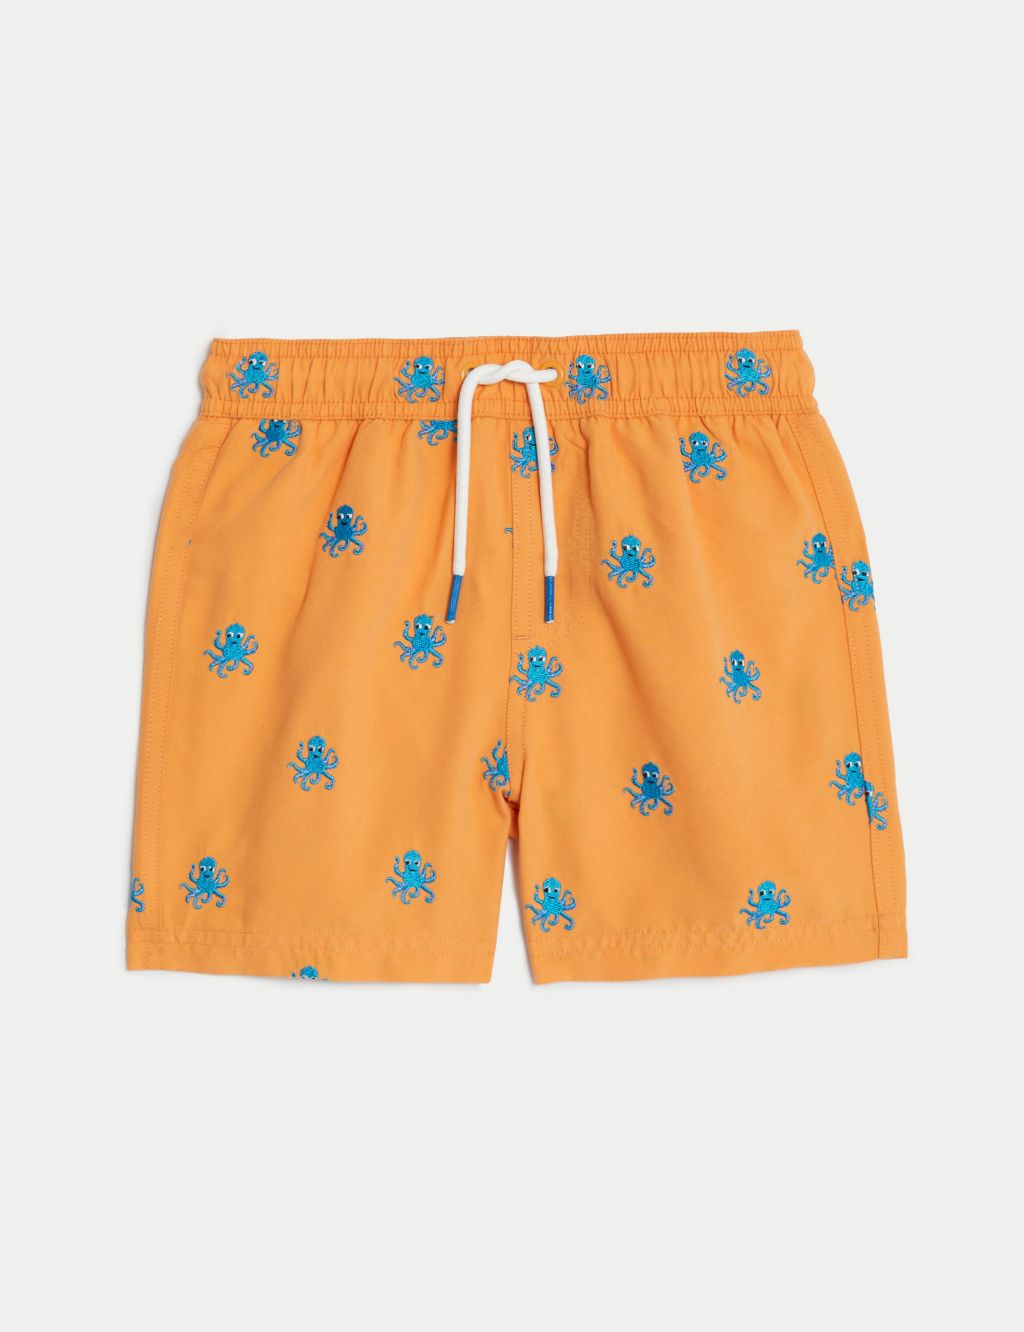 Octopus Embroidered Swim Shorts (2-8 Yrs) image 1